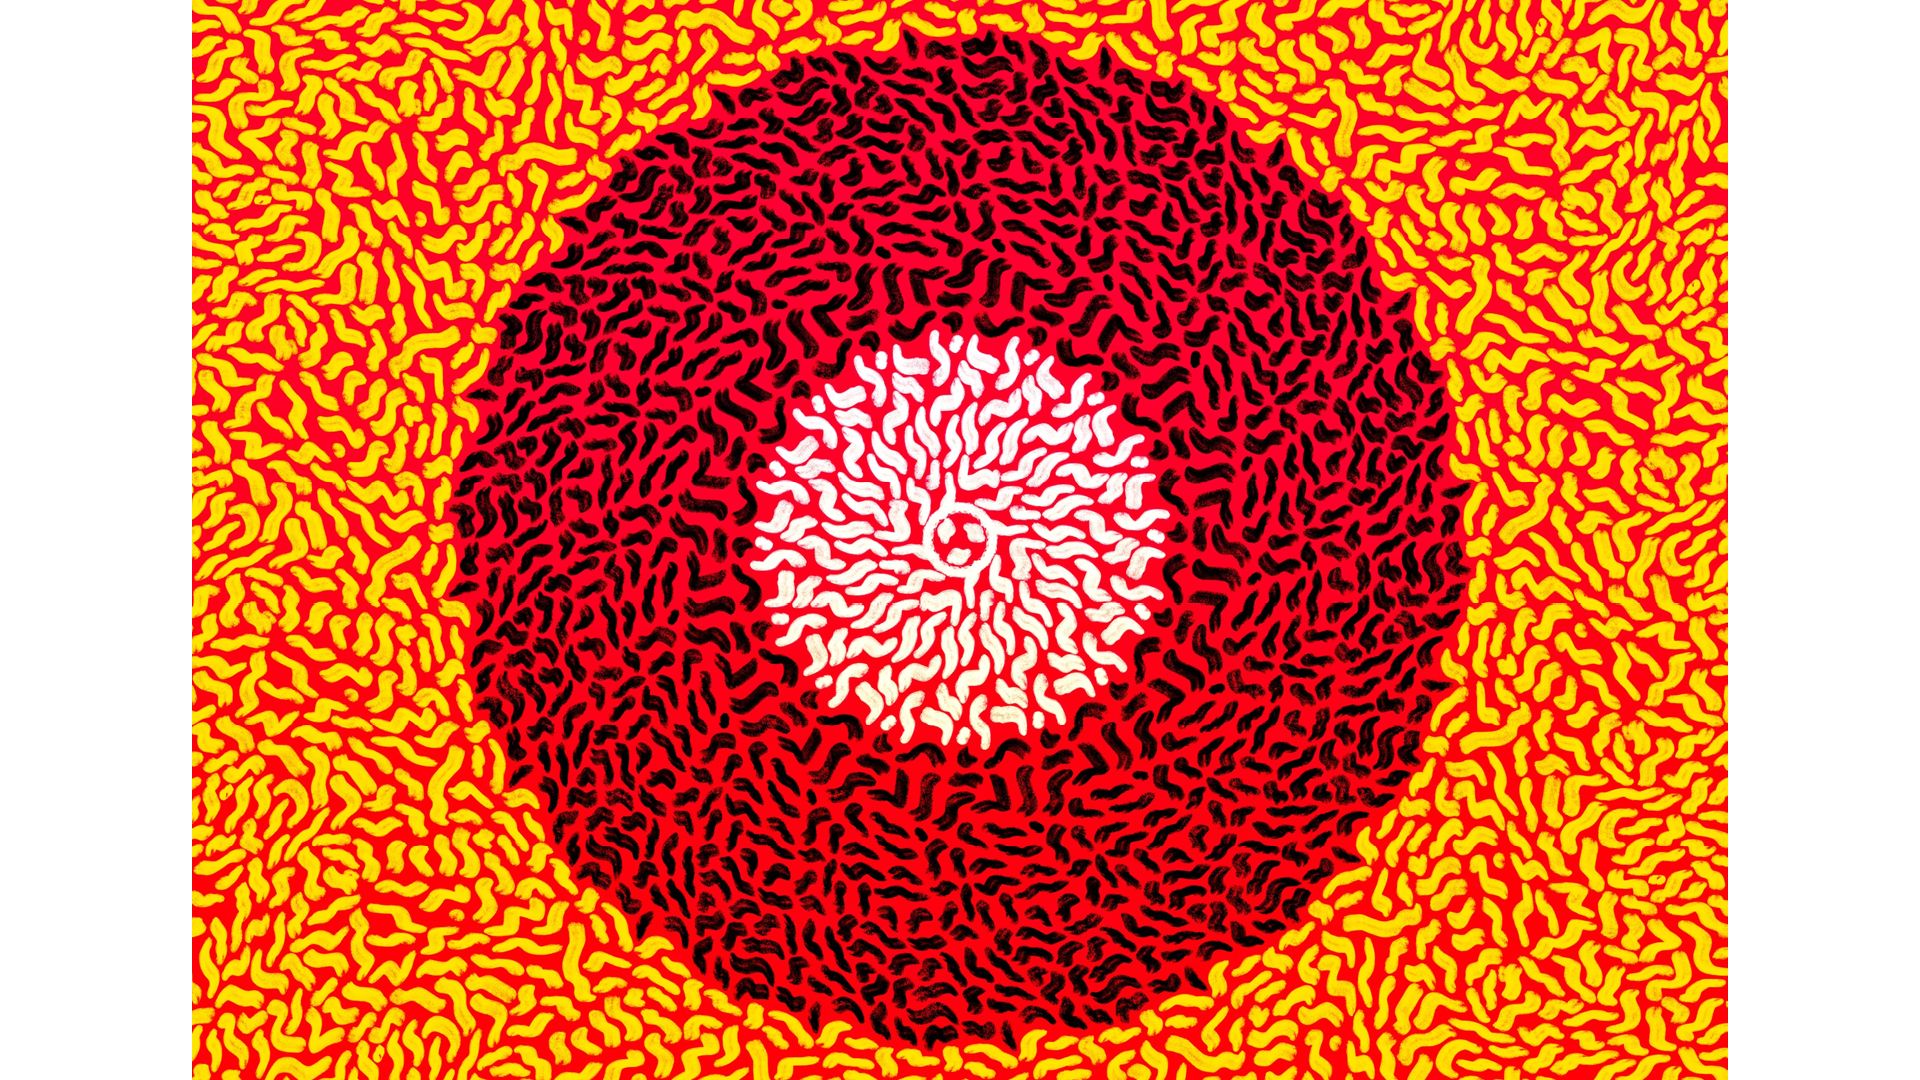 Artwork featuring small shapes making up a larger red circle, with a white one inside it, and yellow background